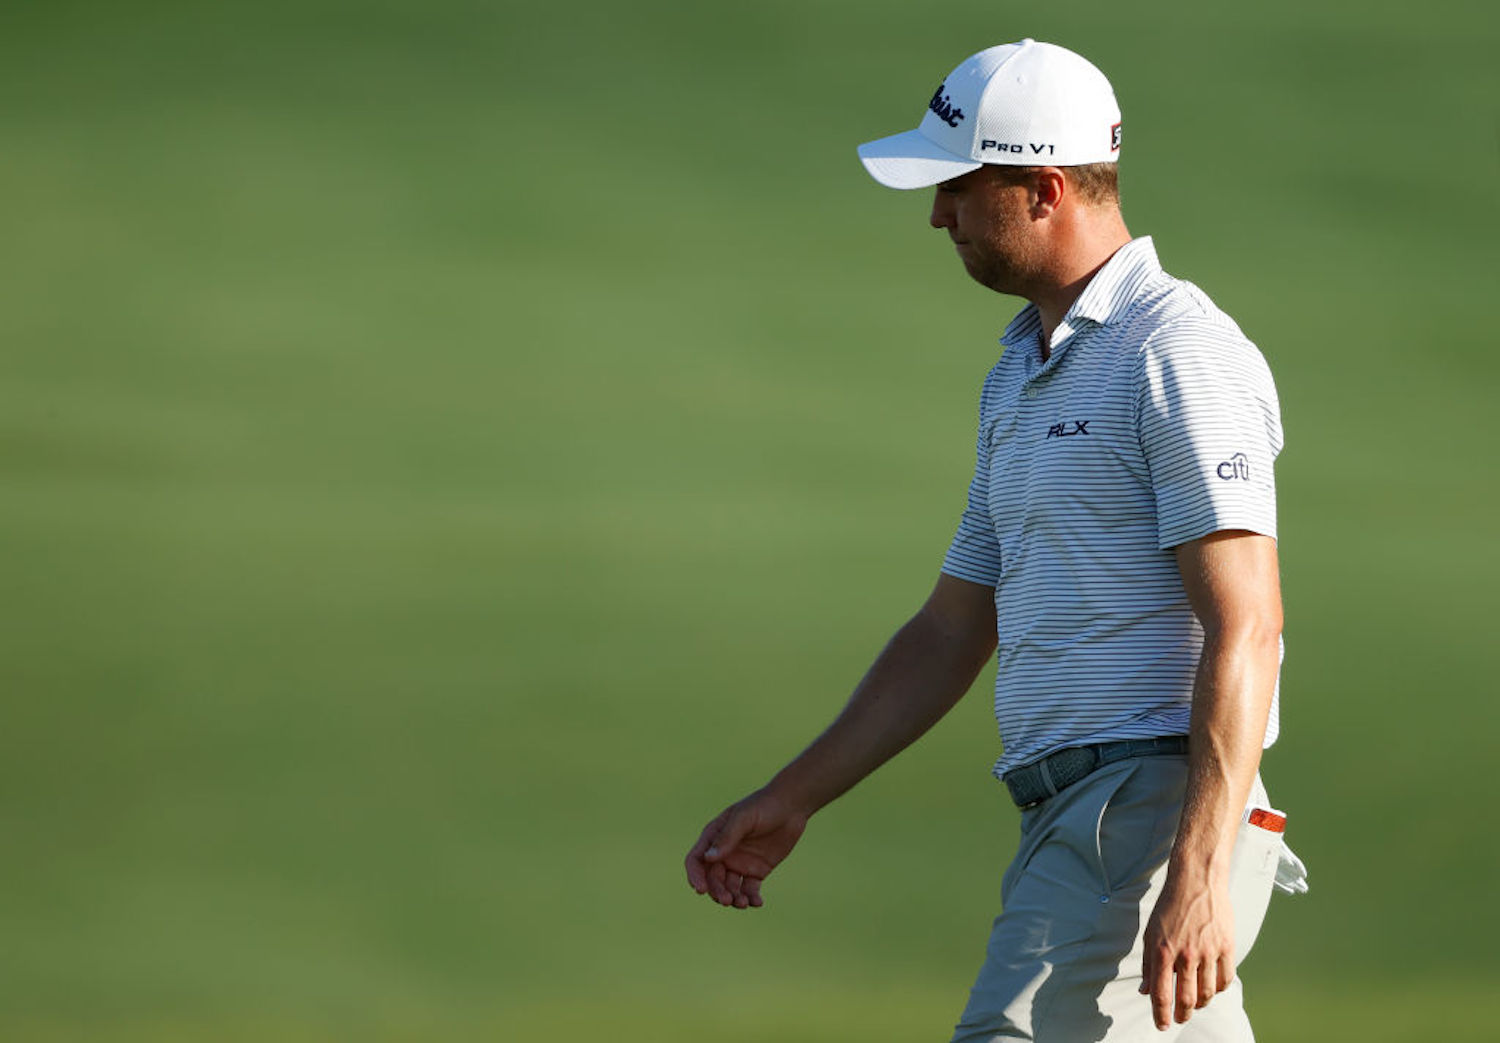 Justin Thomas Apologizes for Spewing Anti-Gay Slur After a Missed Putt